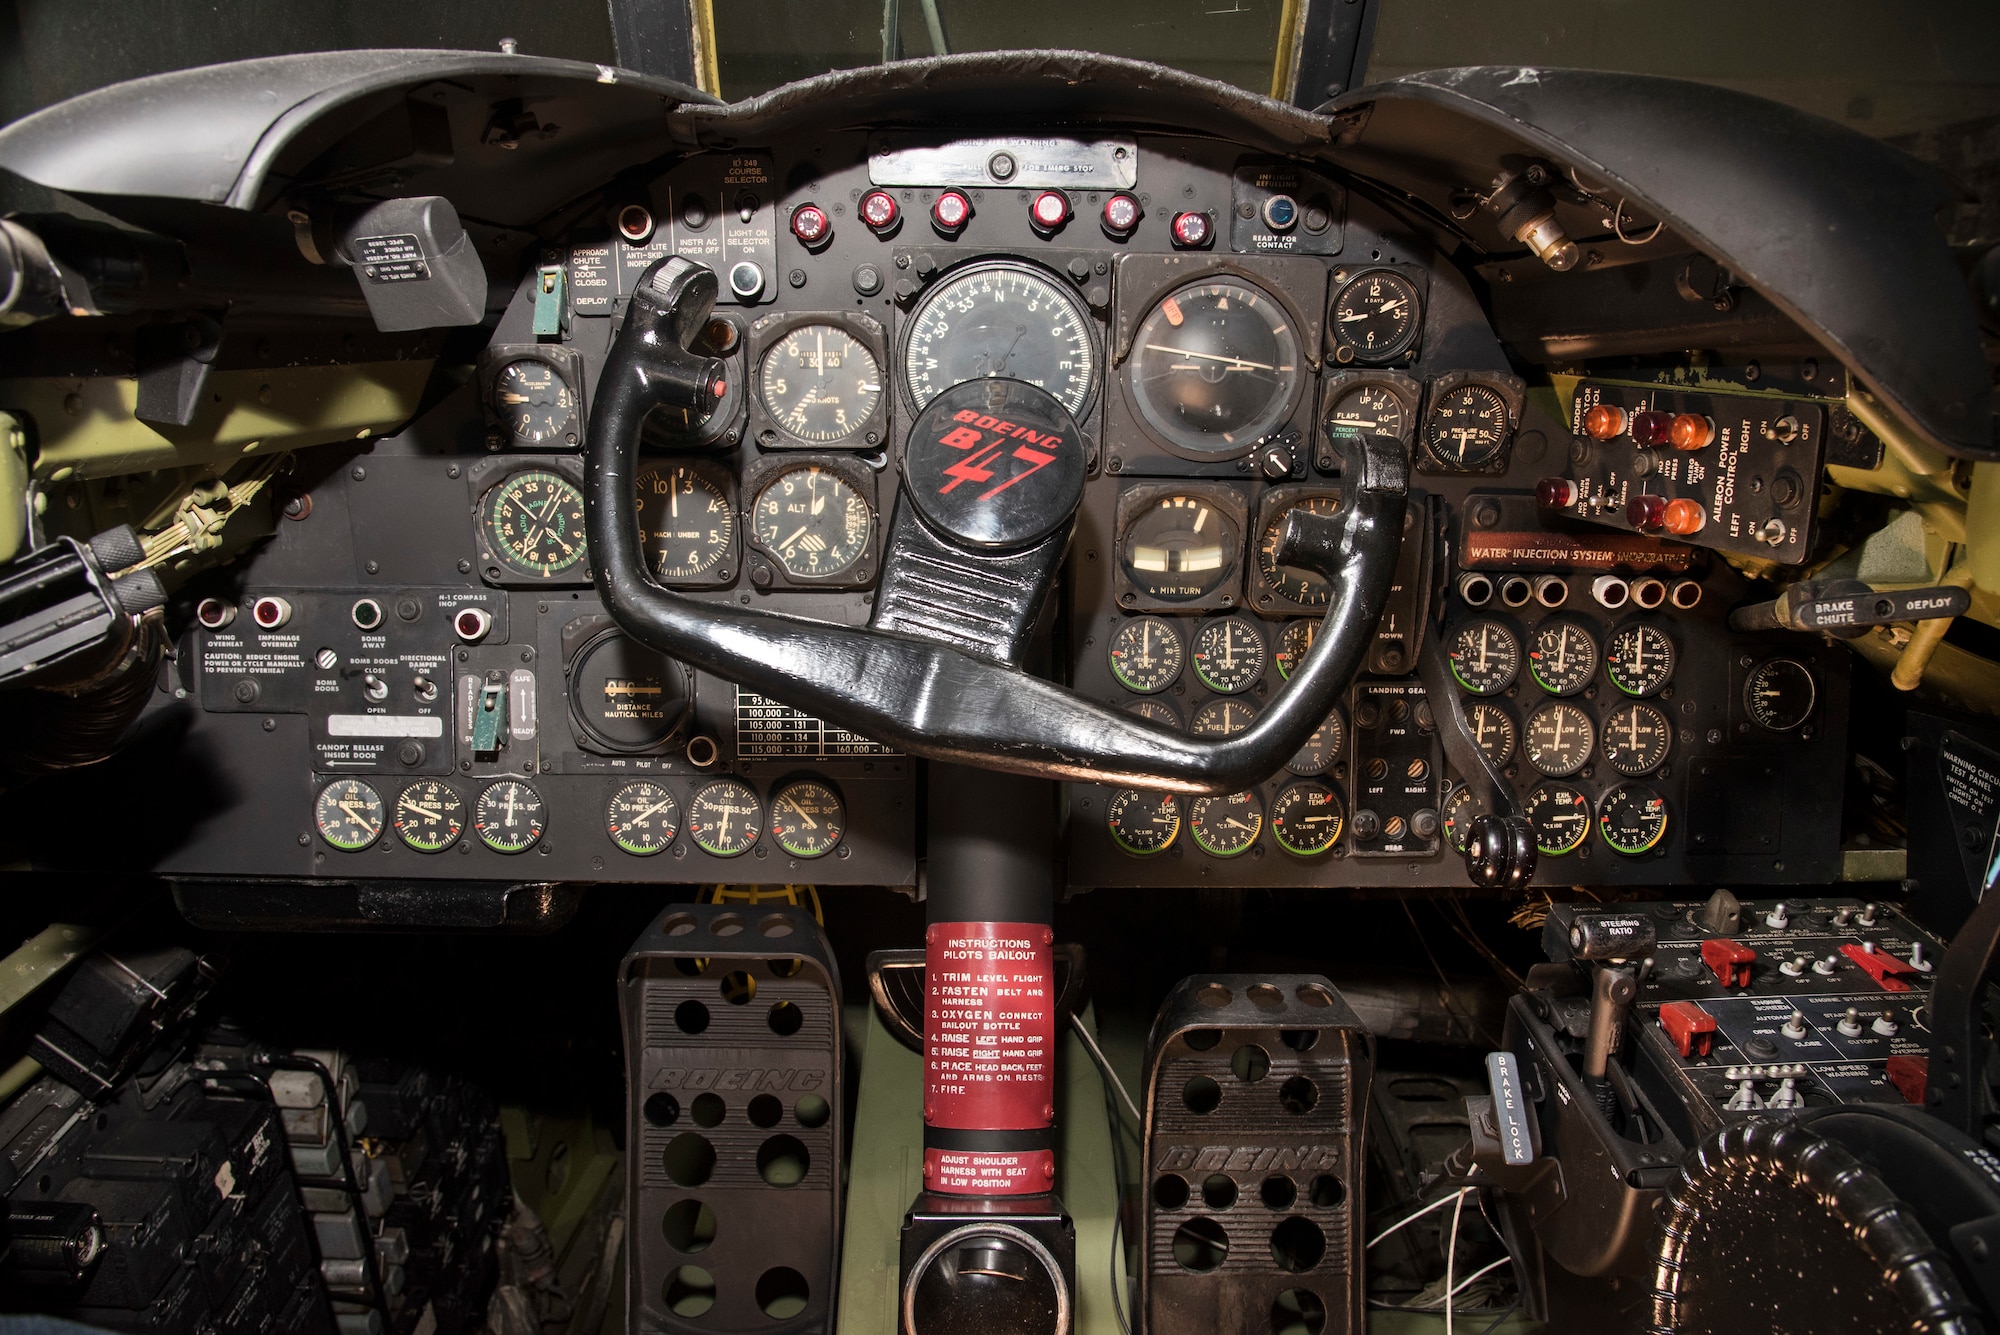 DAYTON, Ohio -- Boeing RB-47H Stratojet pilot controls at the National Museum of the United States Air Force. (U.S. Air Force photo by Ken LaRock)